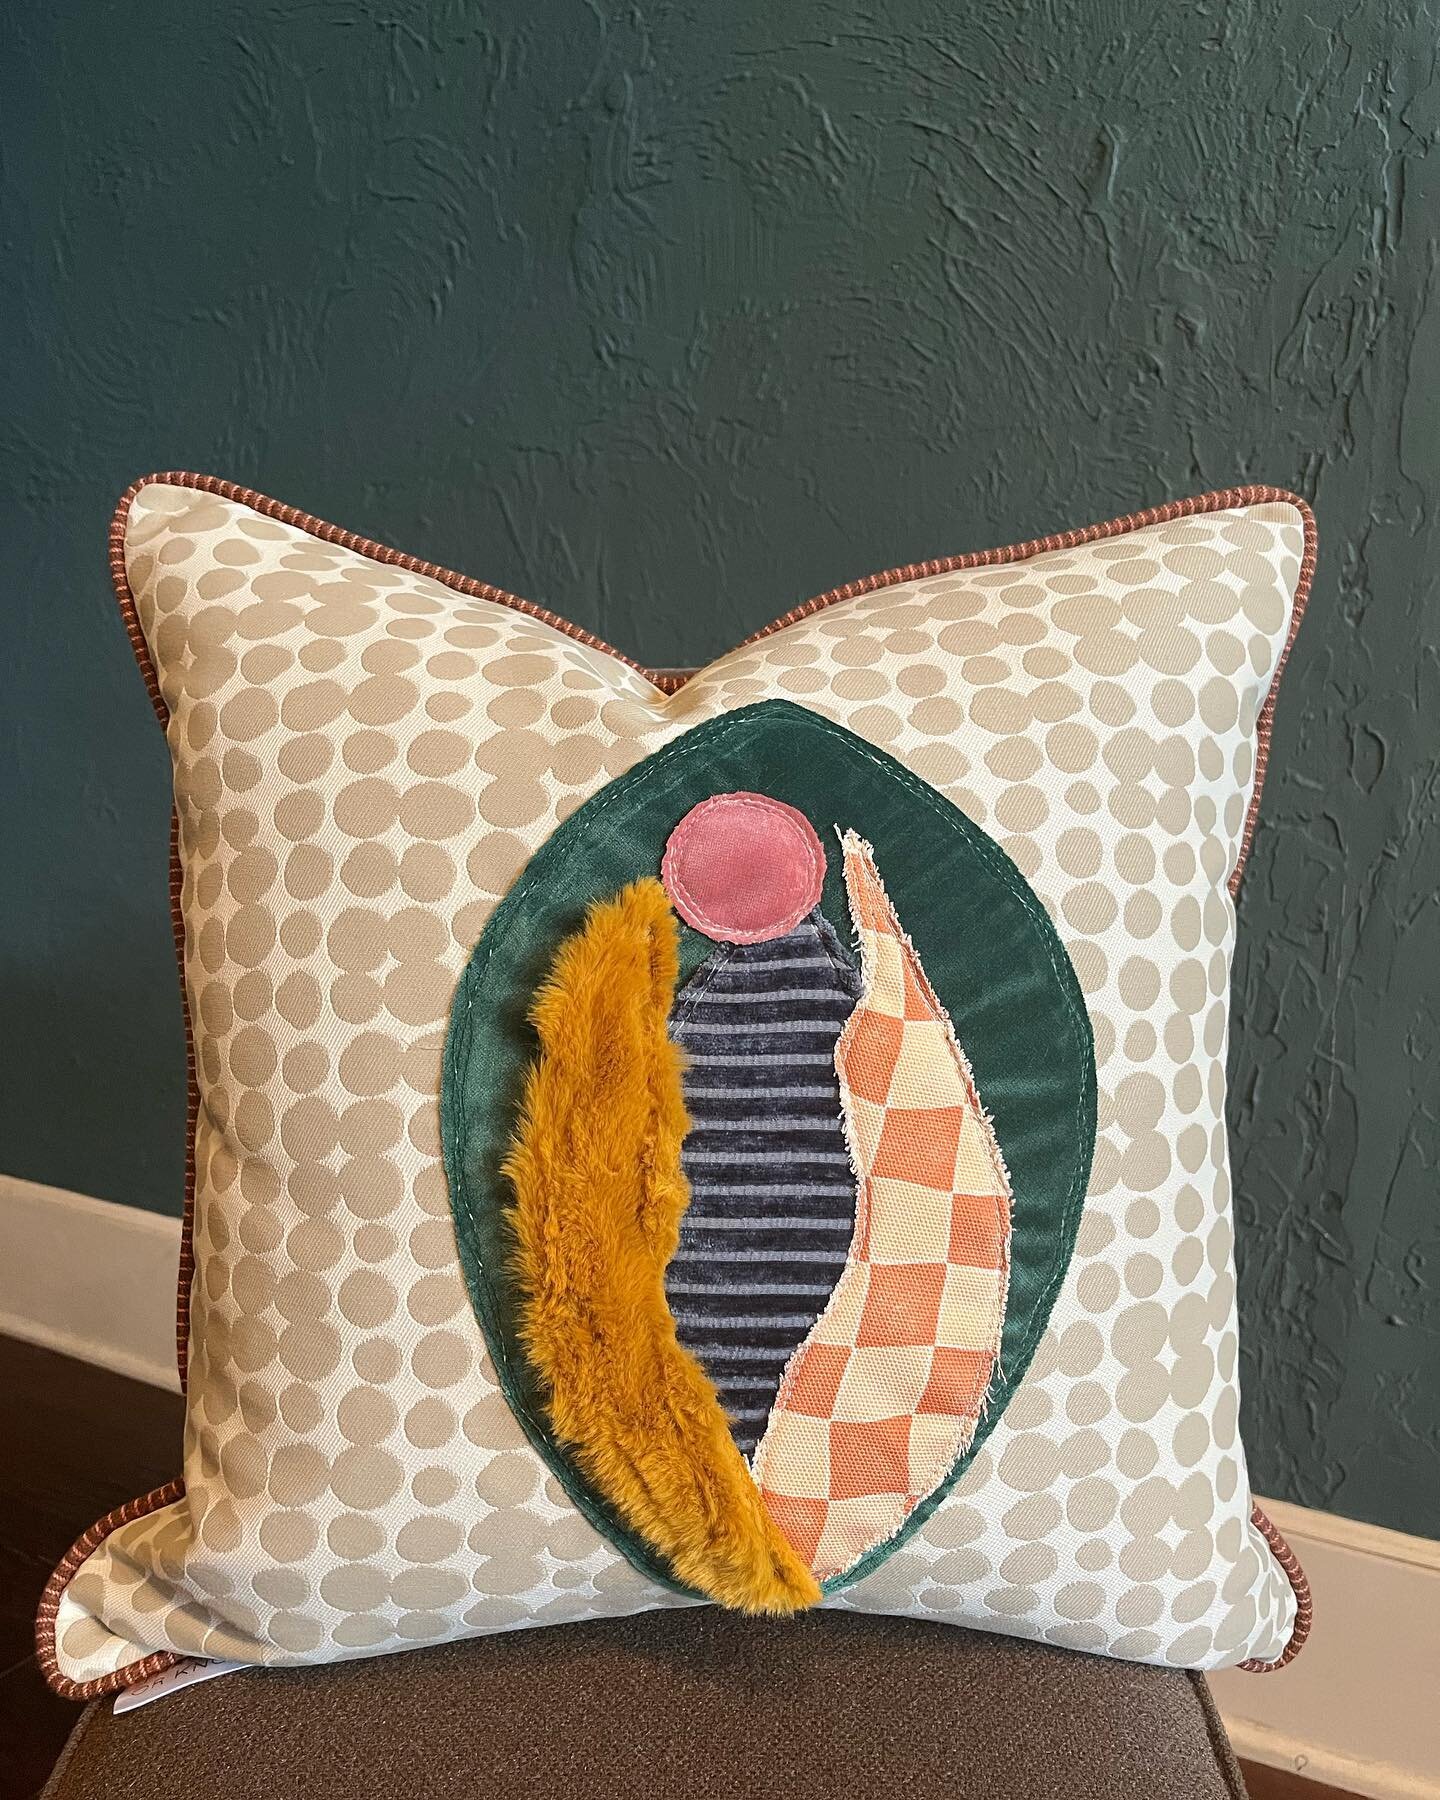 I have been having so much fun making these custom vagina pillows. LETS MAKE MORE PLEASE! 

I make each one with scraps left over from projects that I would typically throw away. Yay for sustainable art! 🕺💛

Need one? (Obviously)
Send me an email a